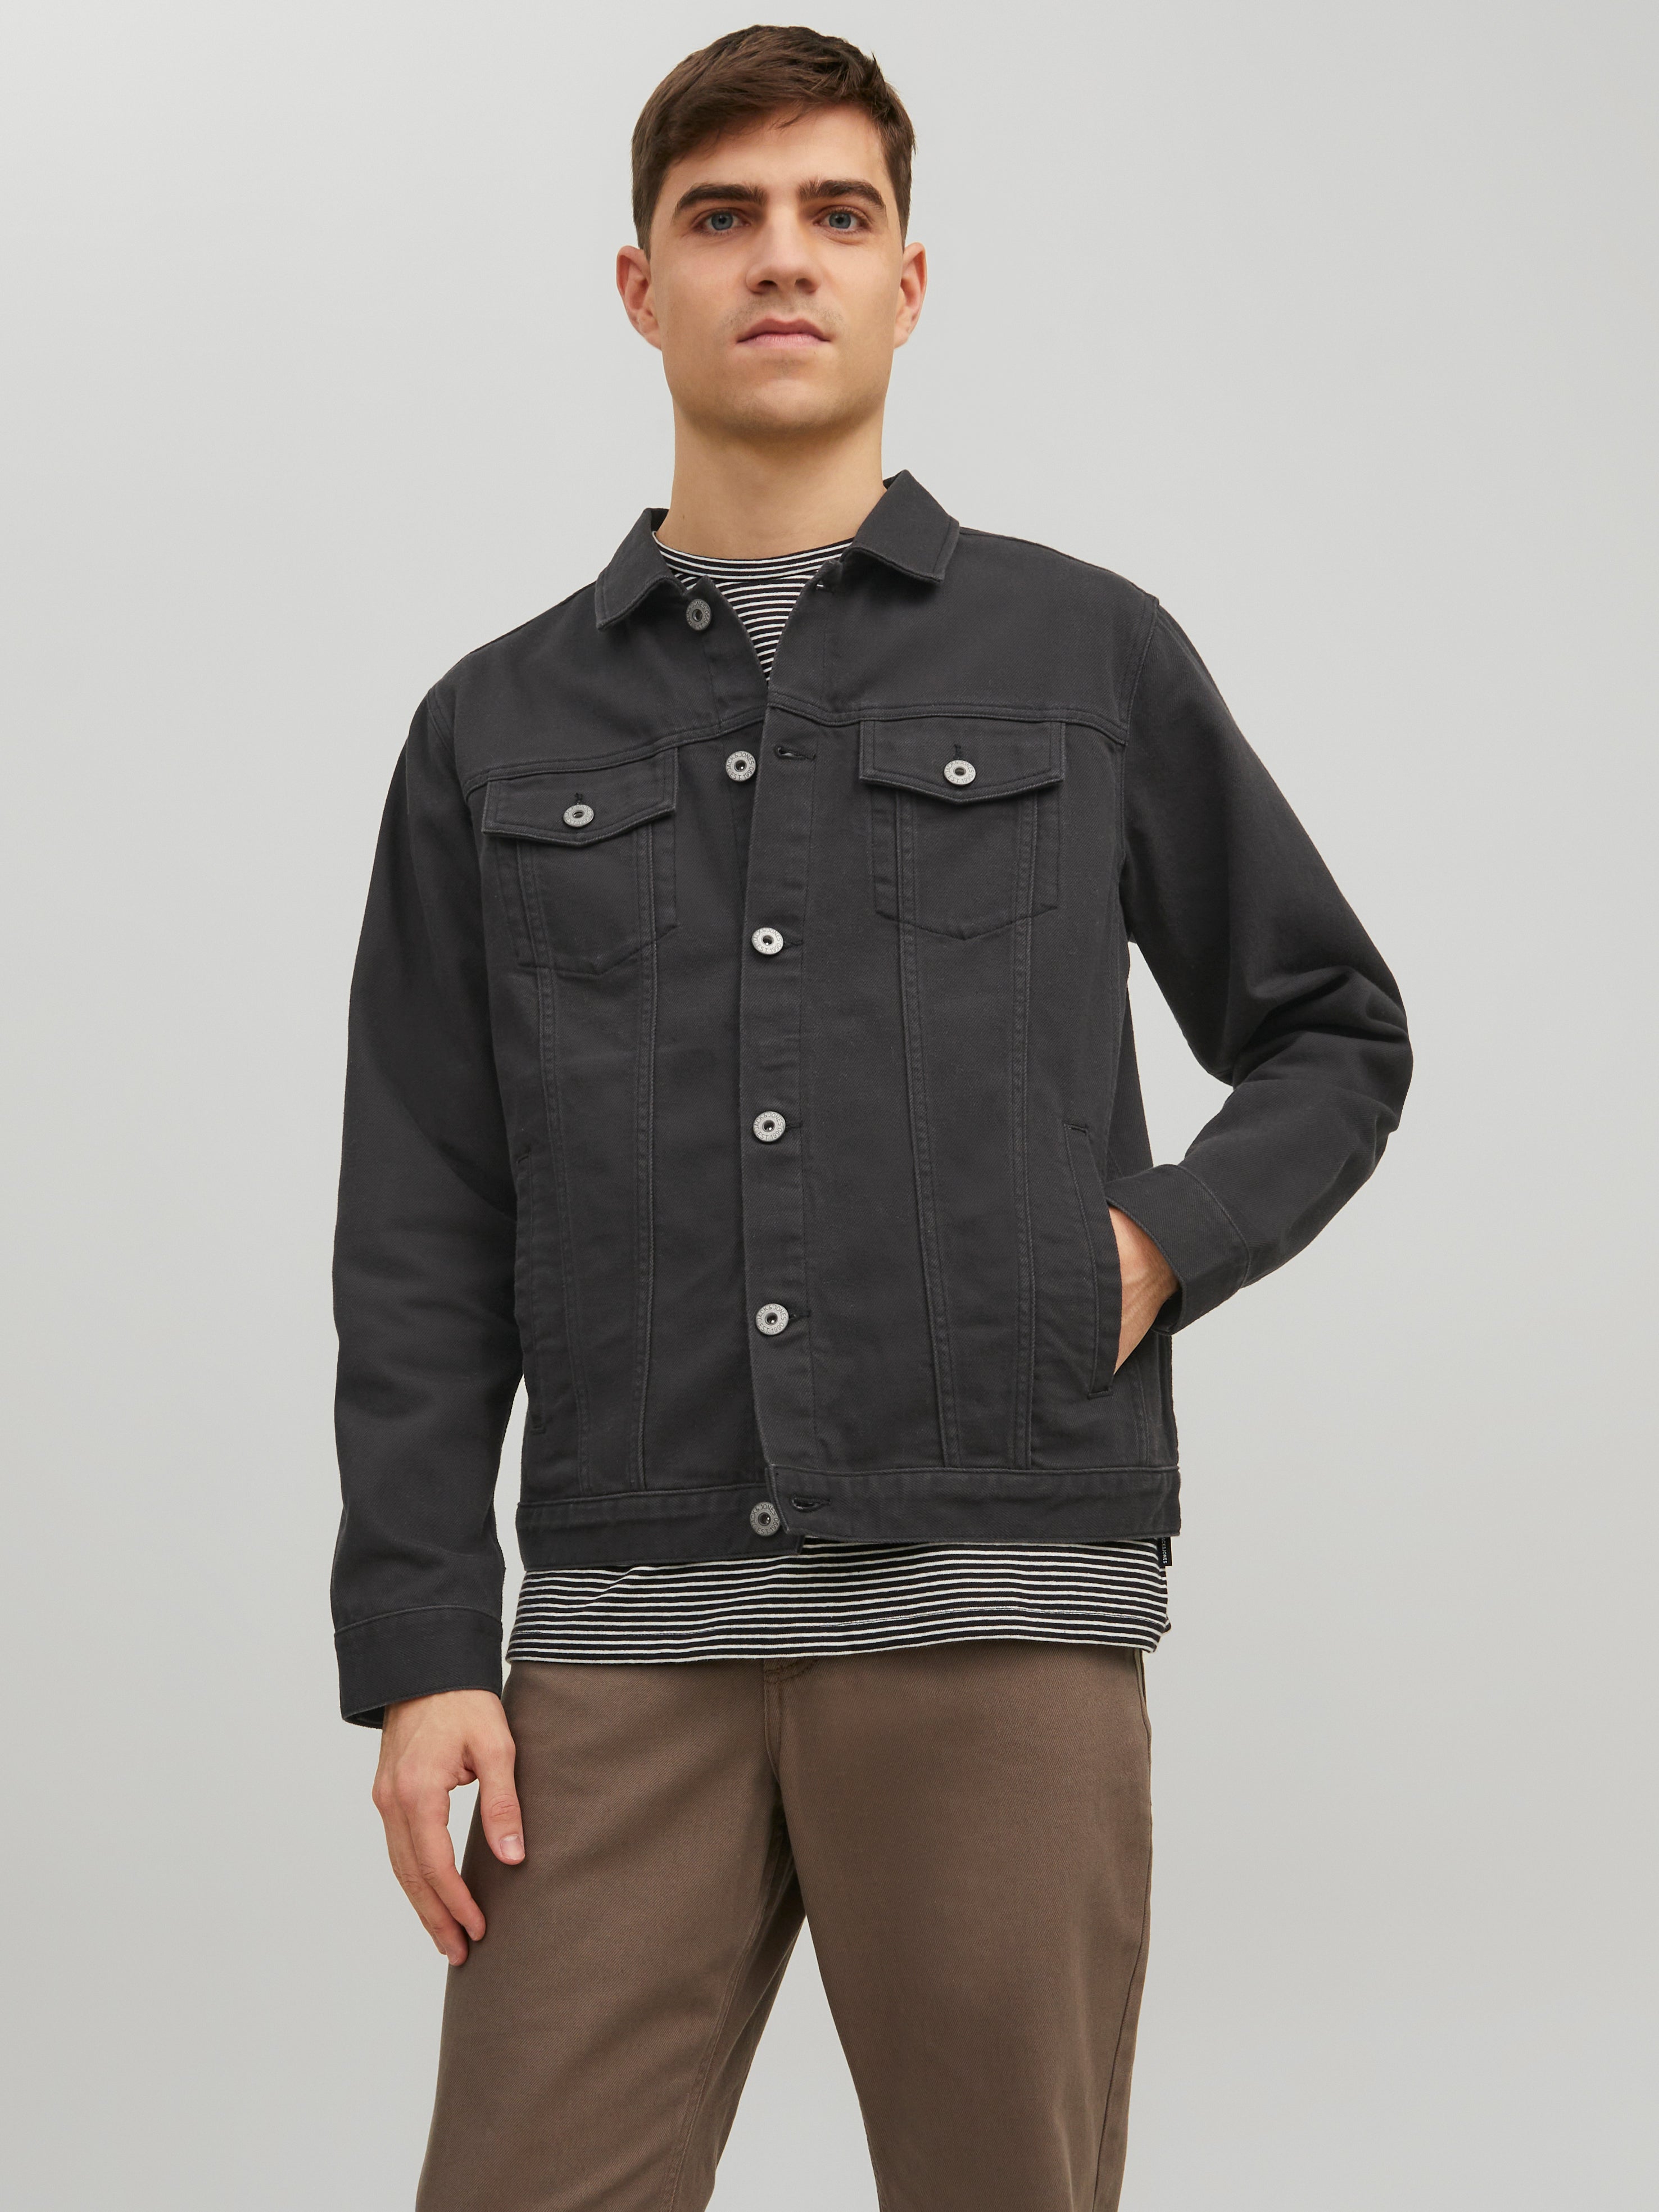 JACK & JONES Denim Jackets Sale and Outlet - Men - 1800 discounted products  | FASHIOLA.co.uk